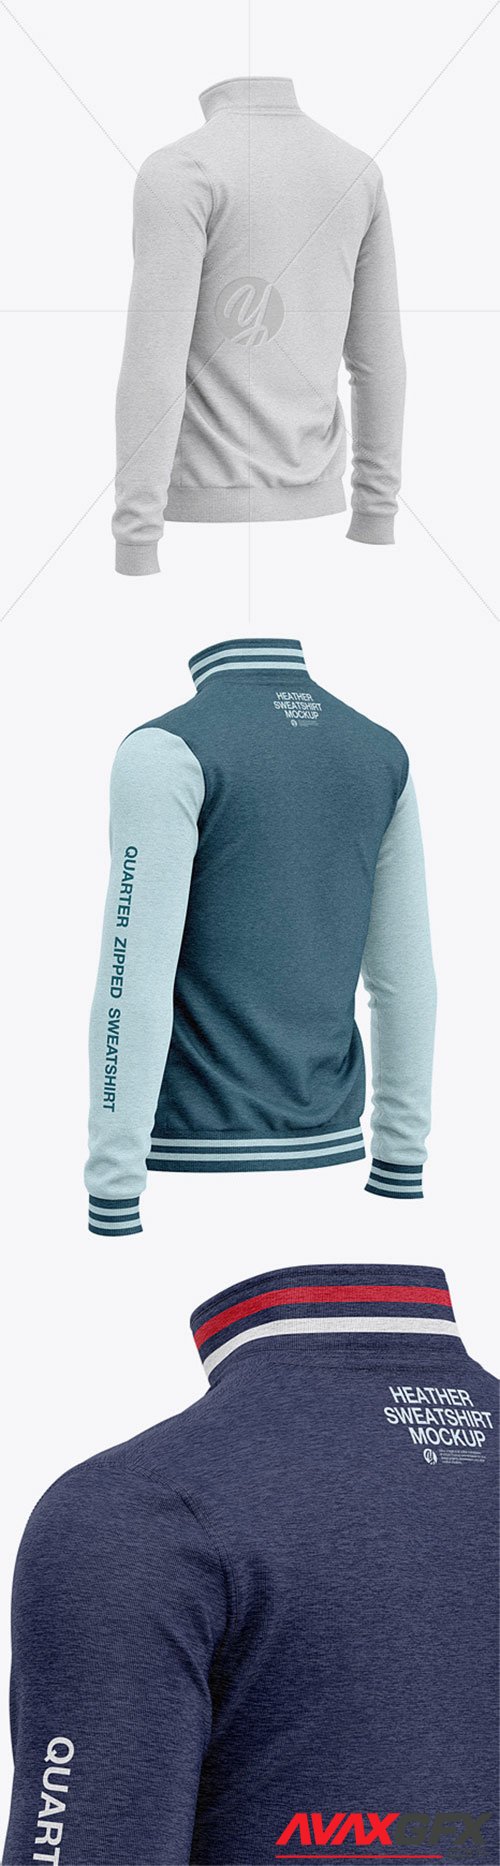 Download Mens Quarter Zip Sweatshirt Mockup Back Half Side View 53170 Avaxgfx All Downloads That You Need In One Place Graphic From Nitroflare Rapidgator